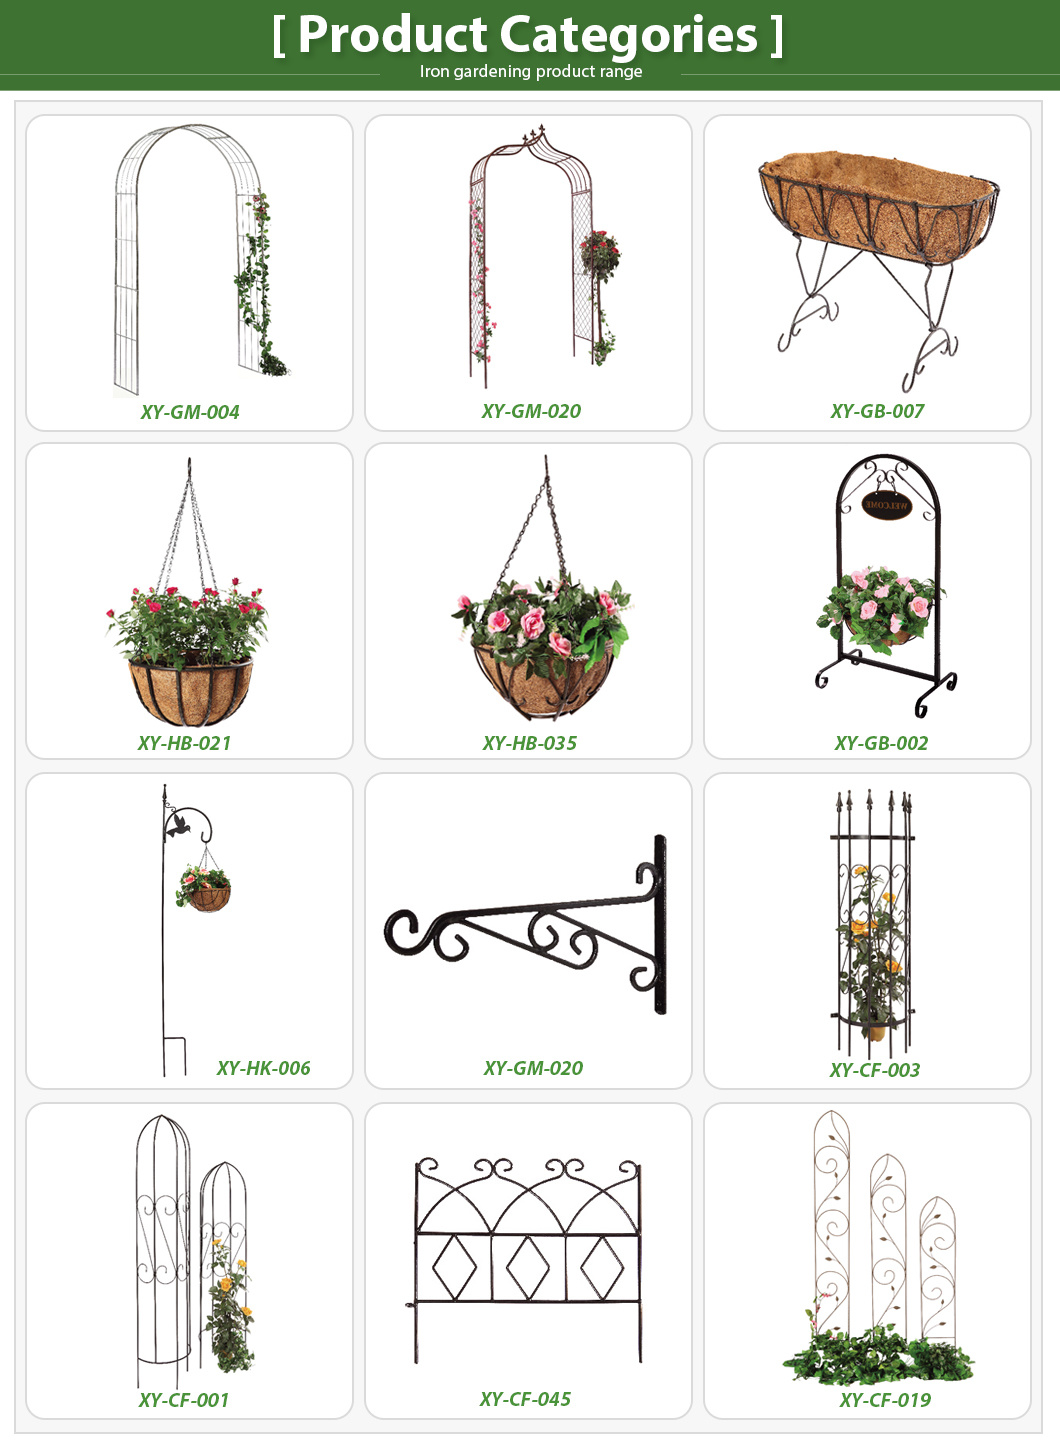 Leaf-Shaped Wrought Iron Hanging Flower Baskets Chain and Coco Liner (BH003754)